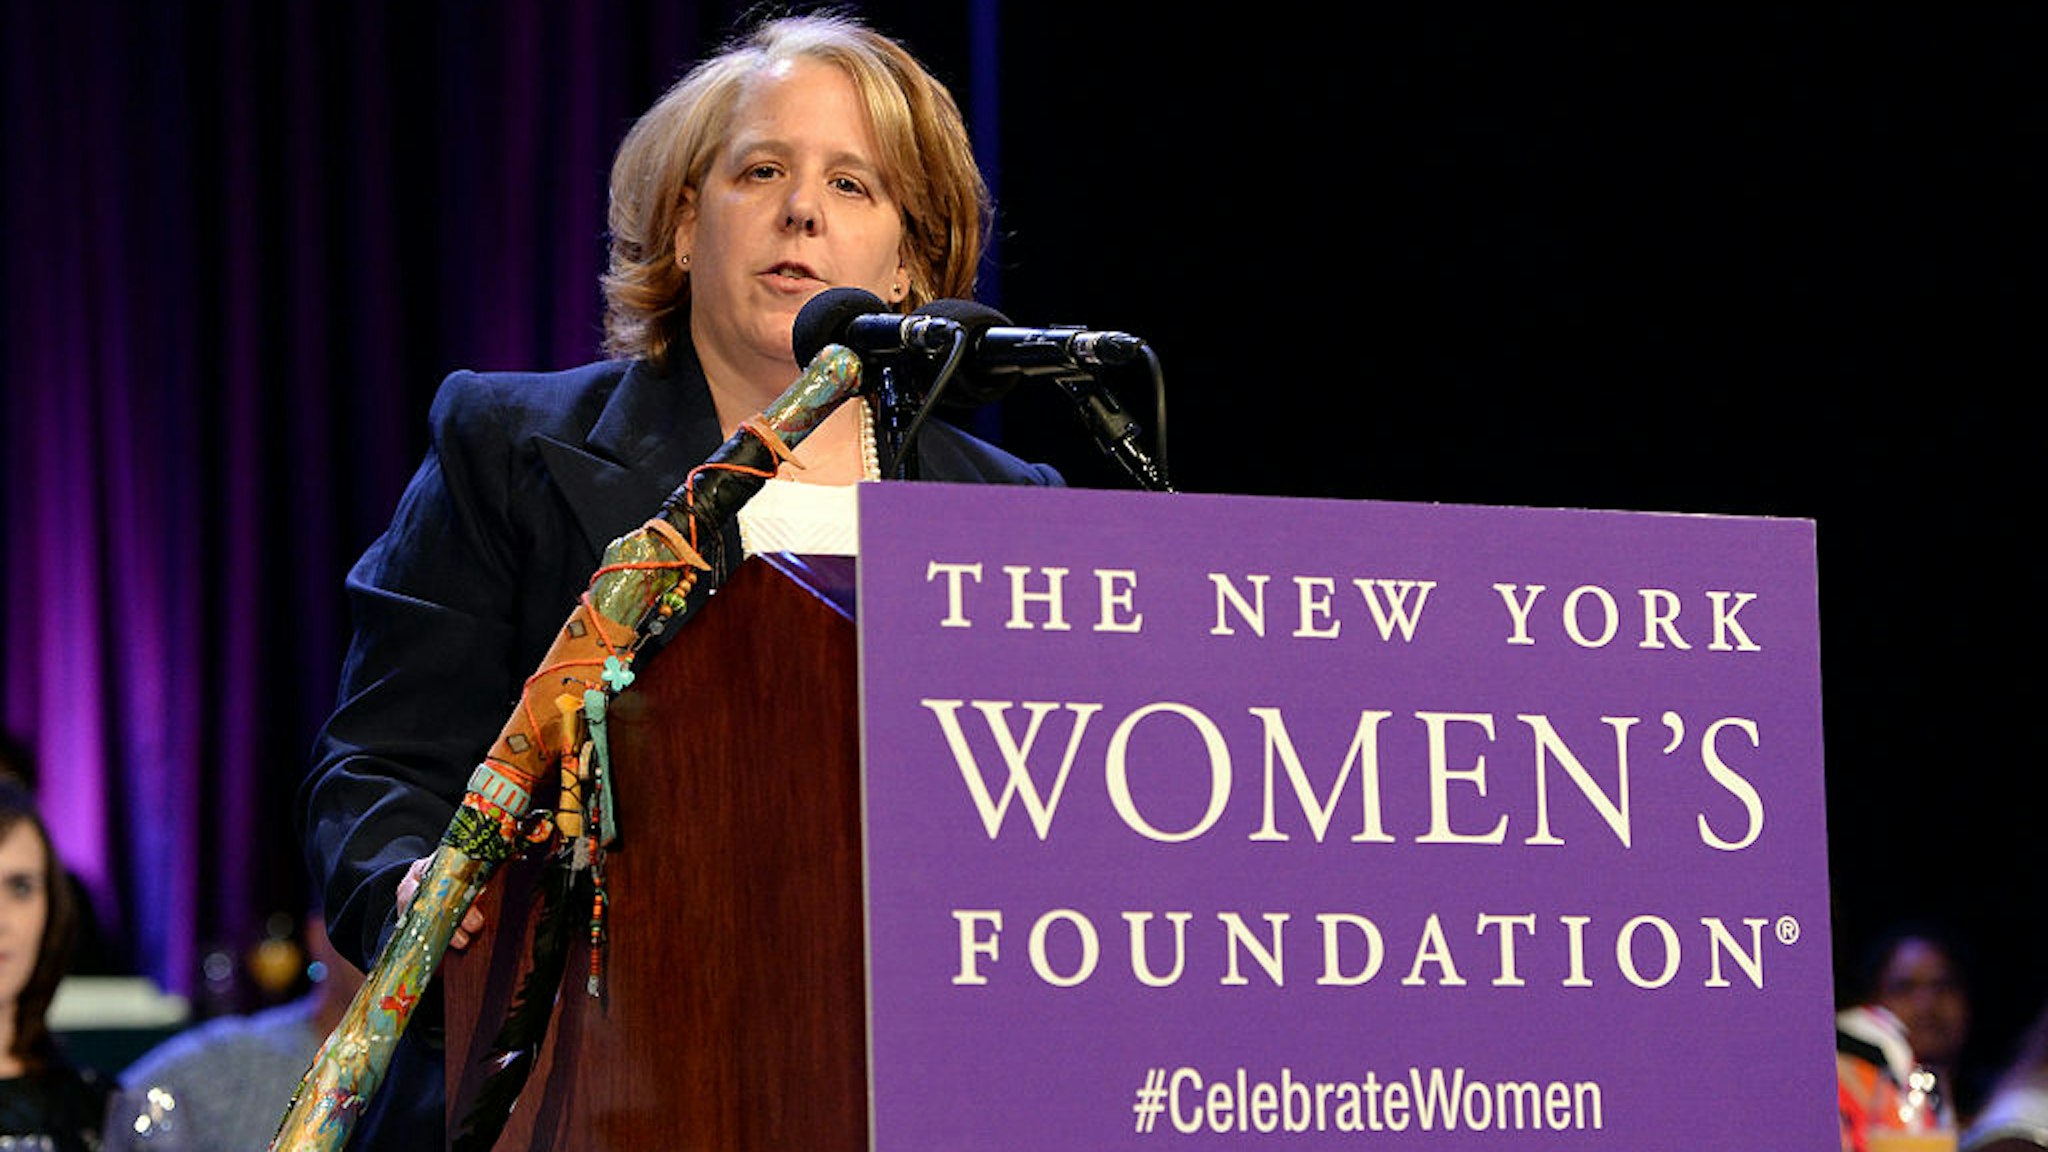 CWB honoree Roberta Kaplan speaks onstage during The New York Women's Foundation Celebrating Women Breakfast at Marriott Marquis Hotel on May 14, 2015 in New York City.